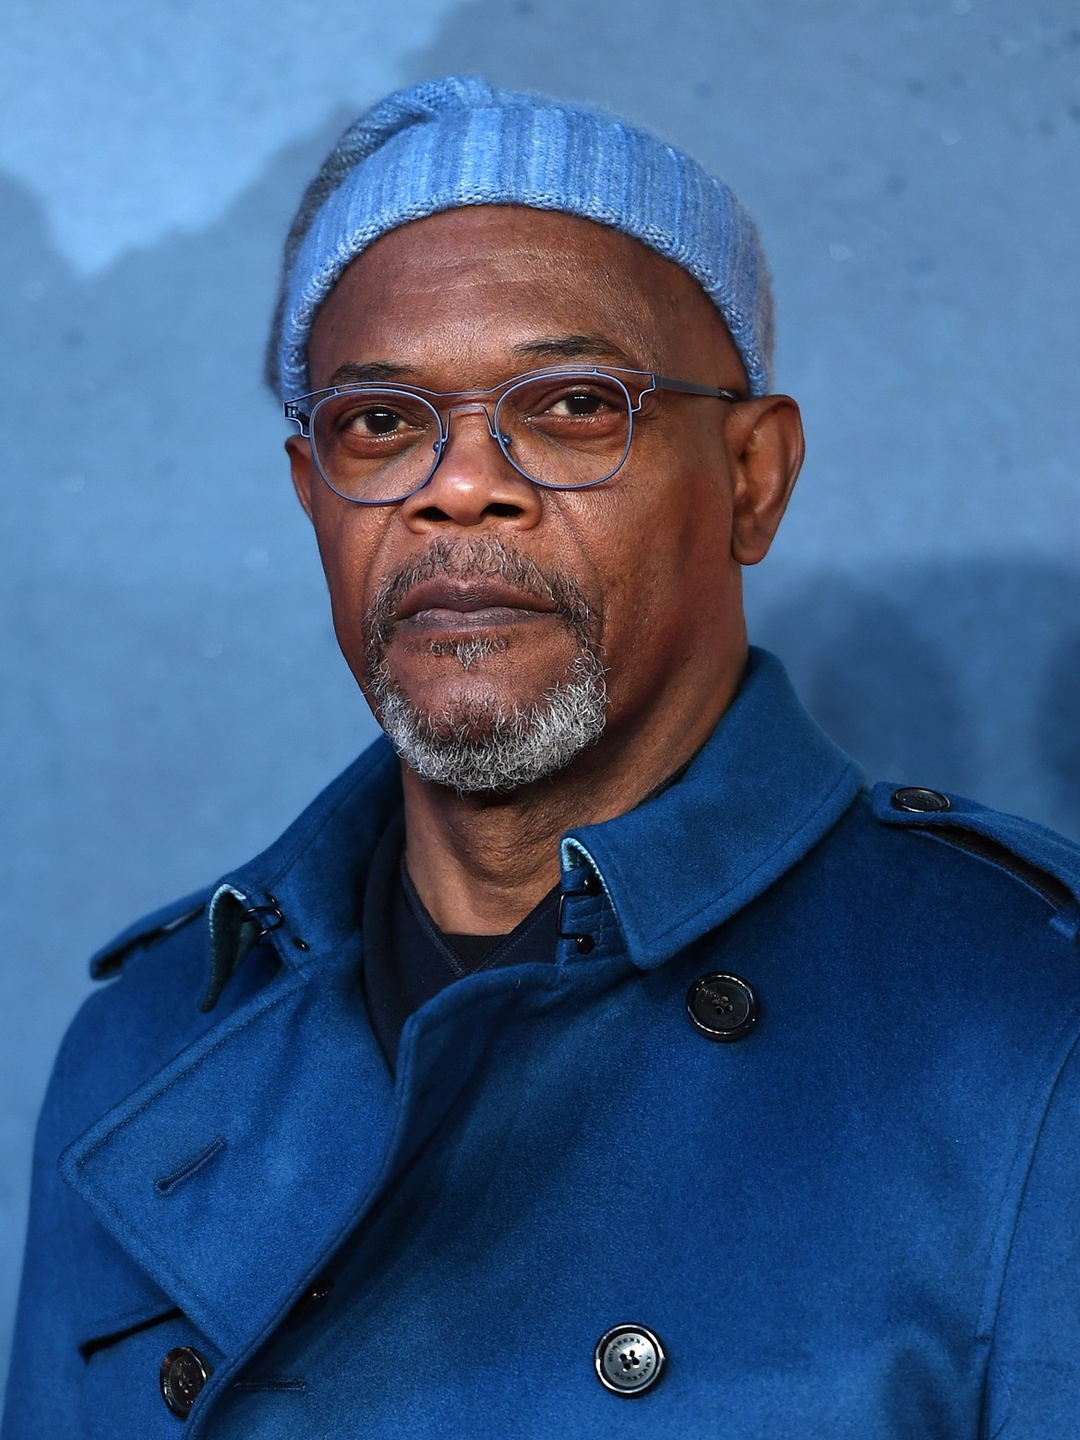 Samuel L. Jackson in his youth